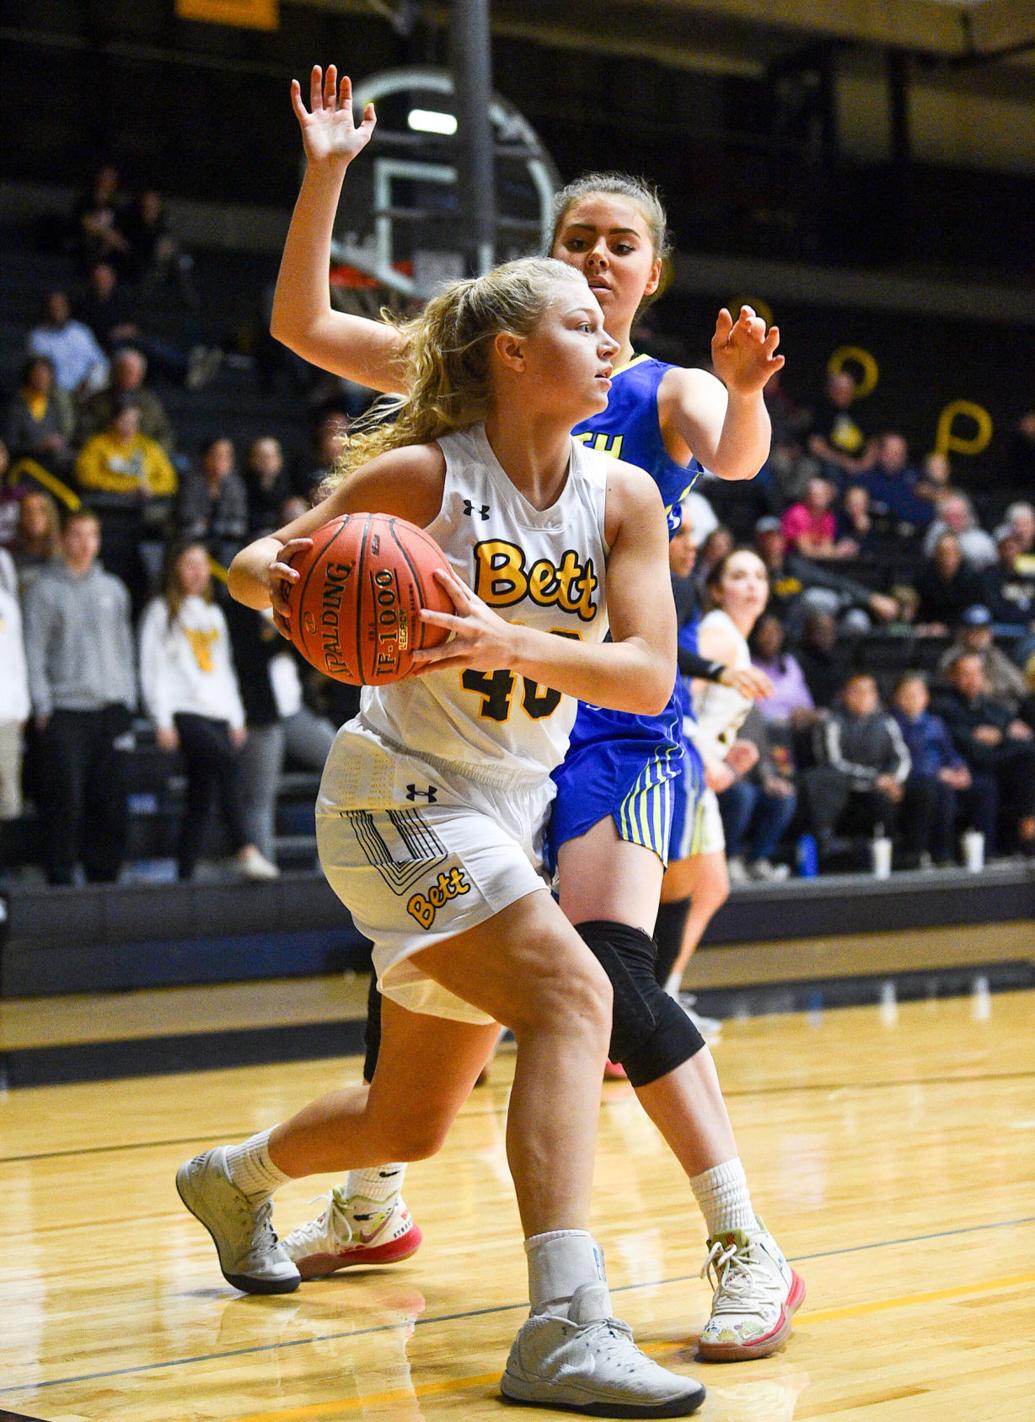 Dillie, defense sparks North to win over Bettendorf